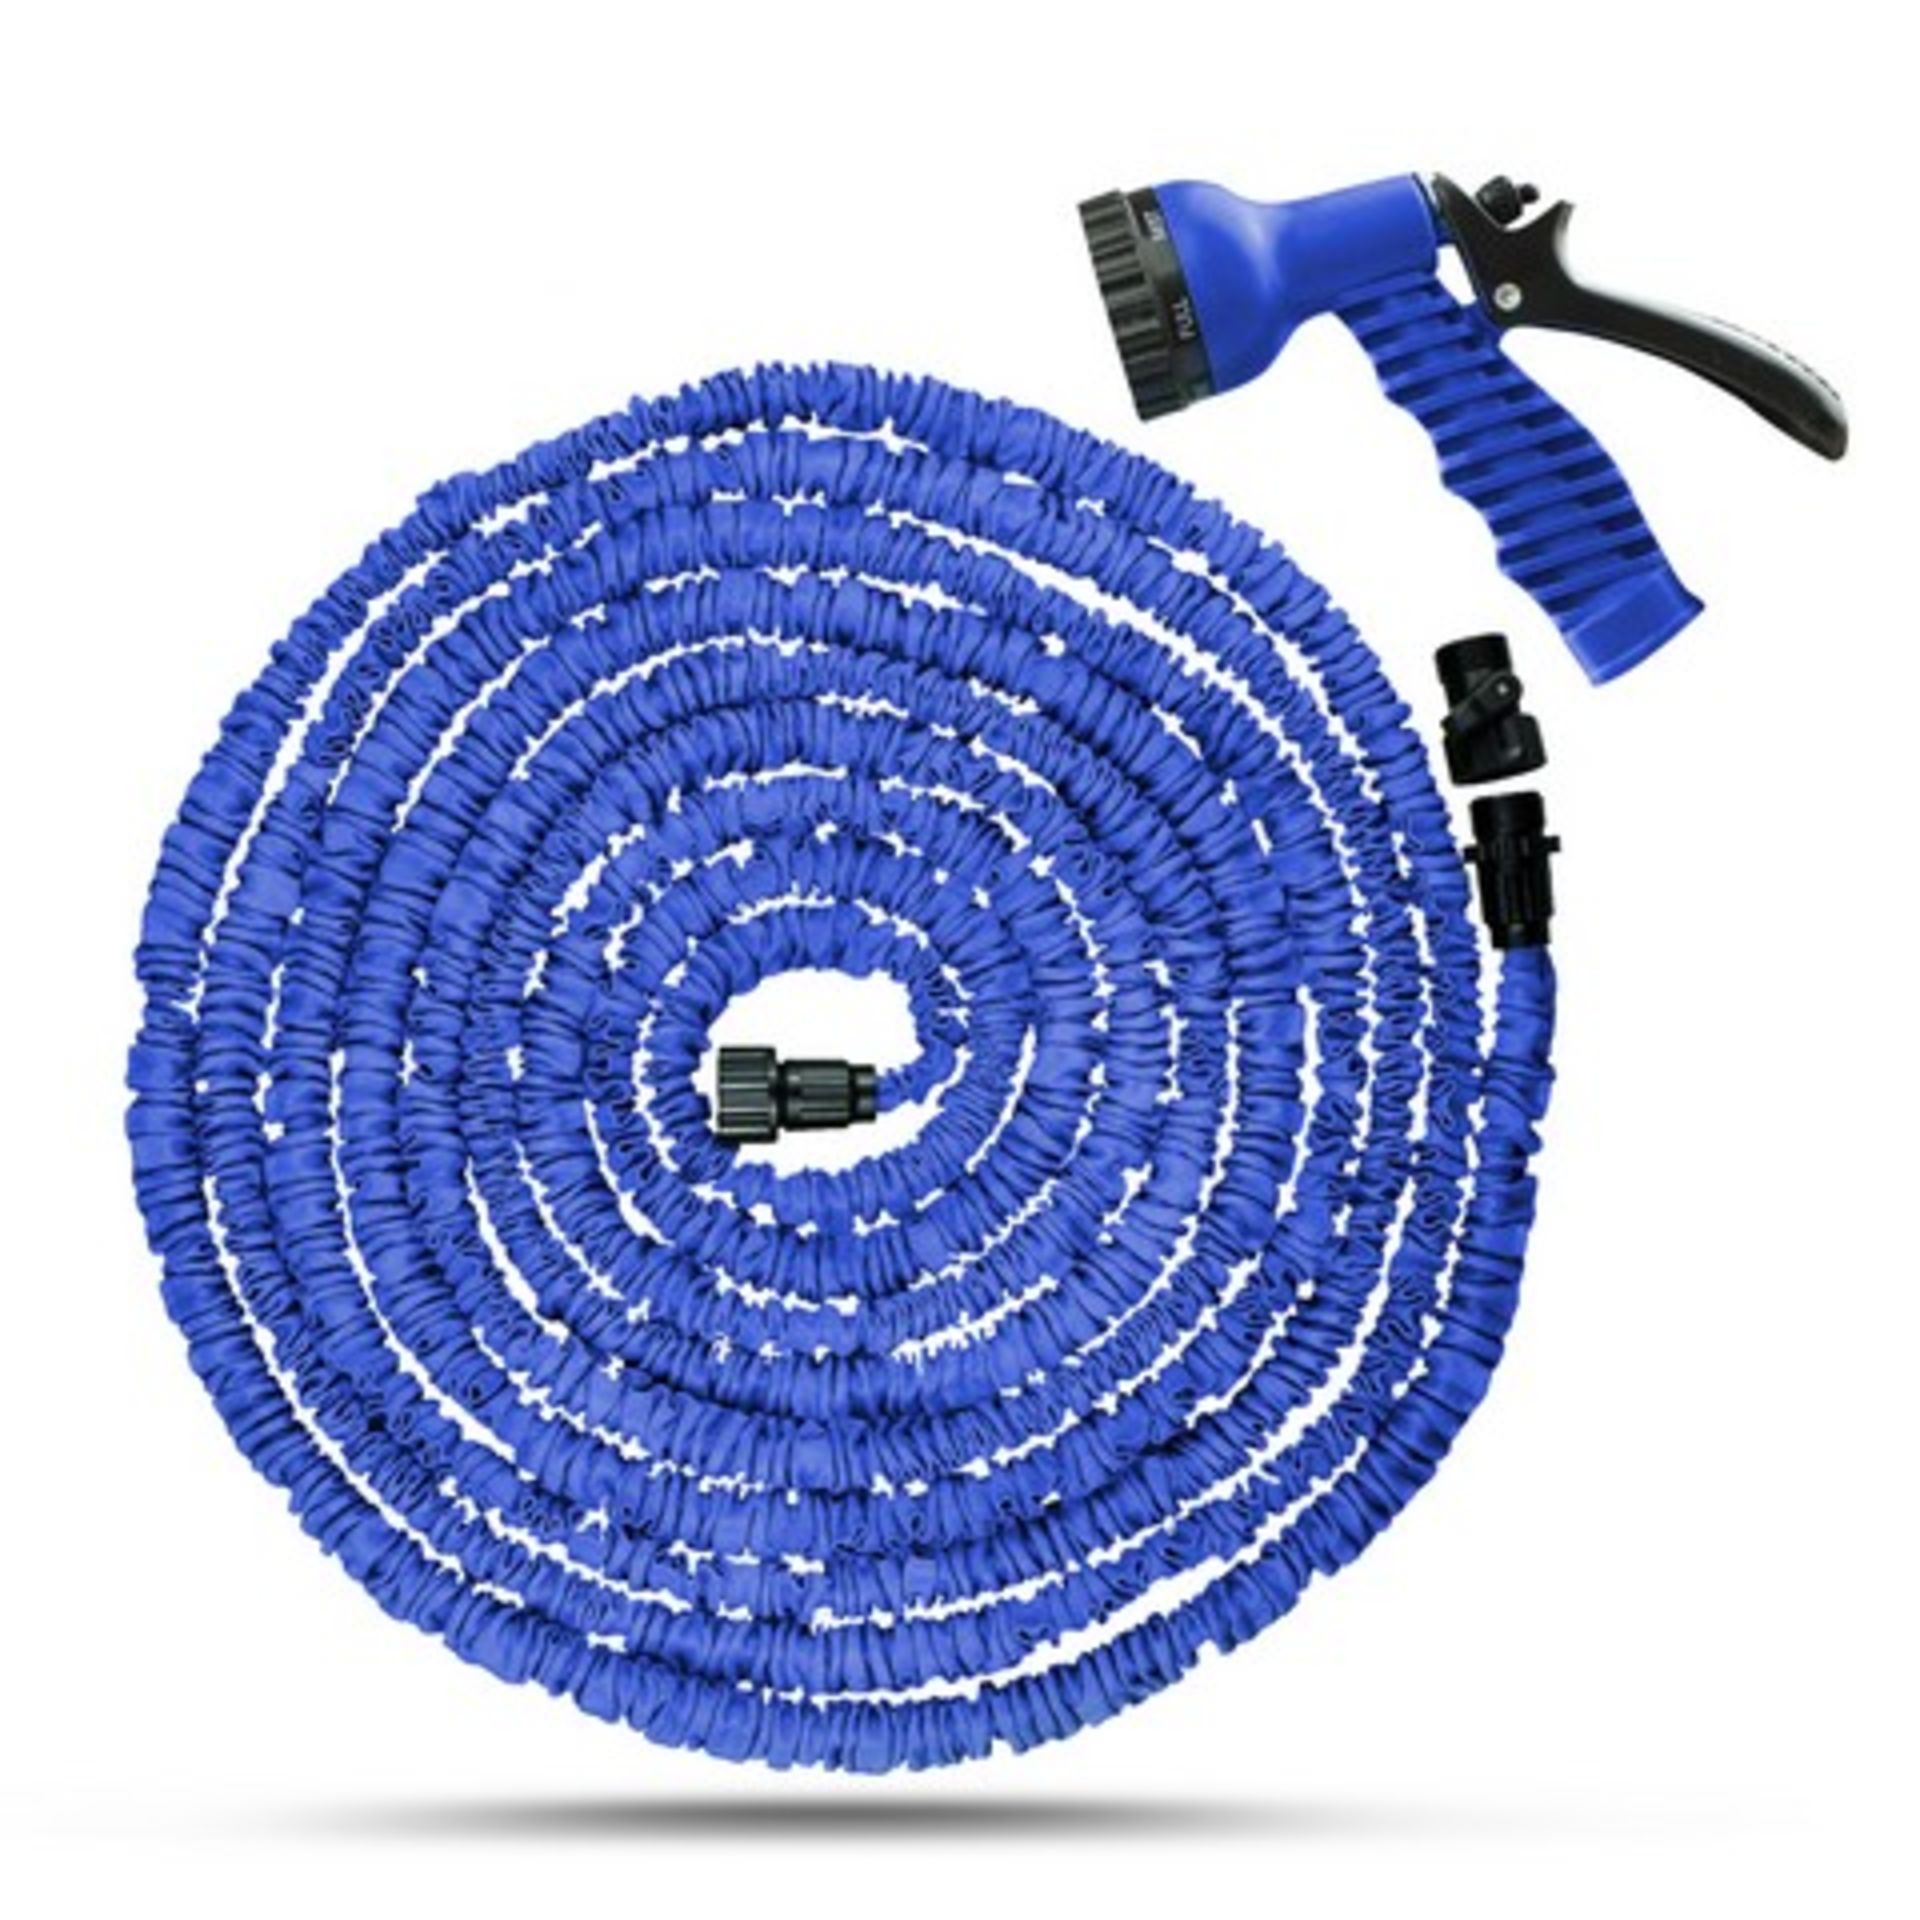 + VAT Brand New 75 Foot Expandable Hose - Automatically Expands - Lightweight - Easily Stored eBay